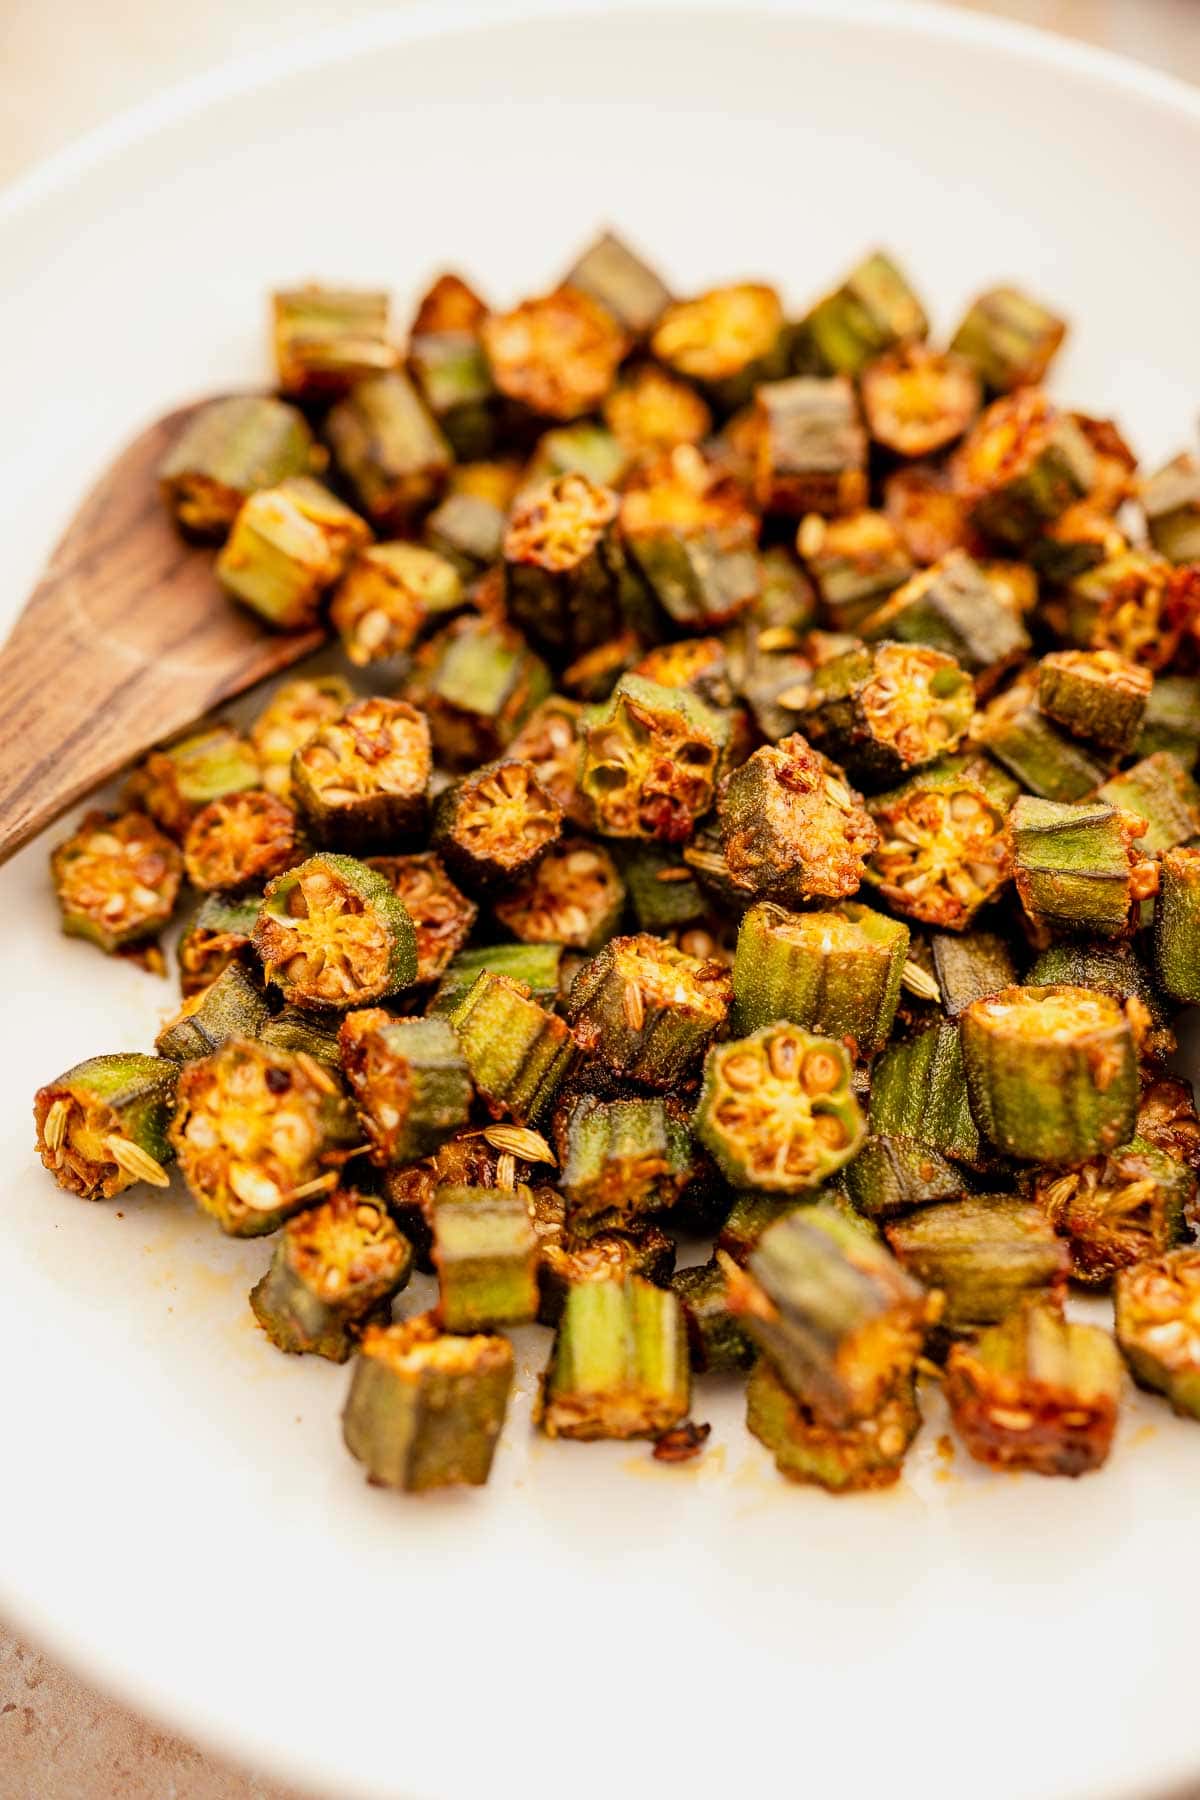 Sautéed chopped okra recipe on a white plate with a wooden spoon.